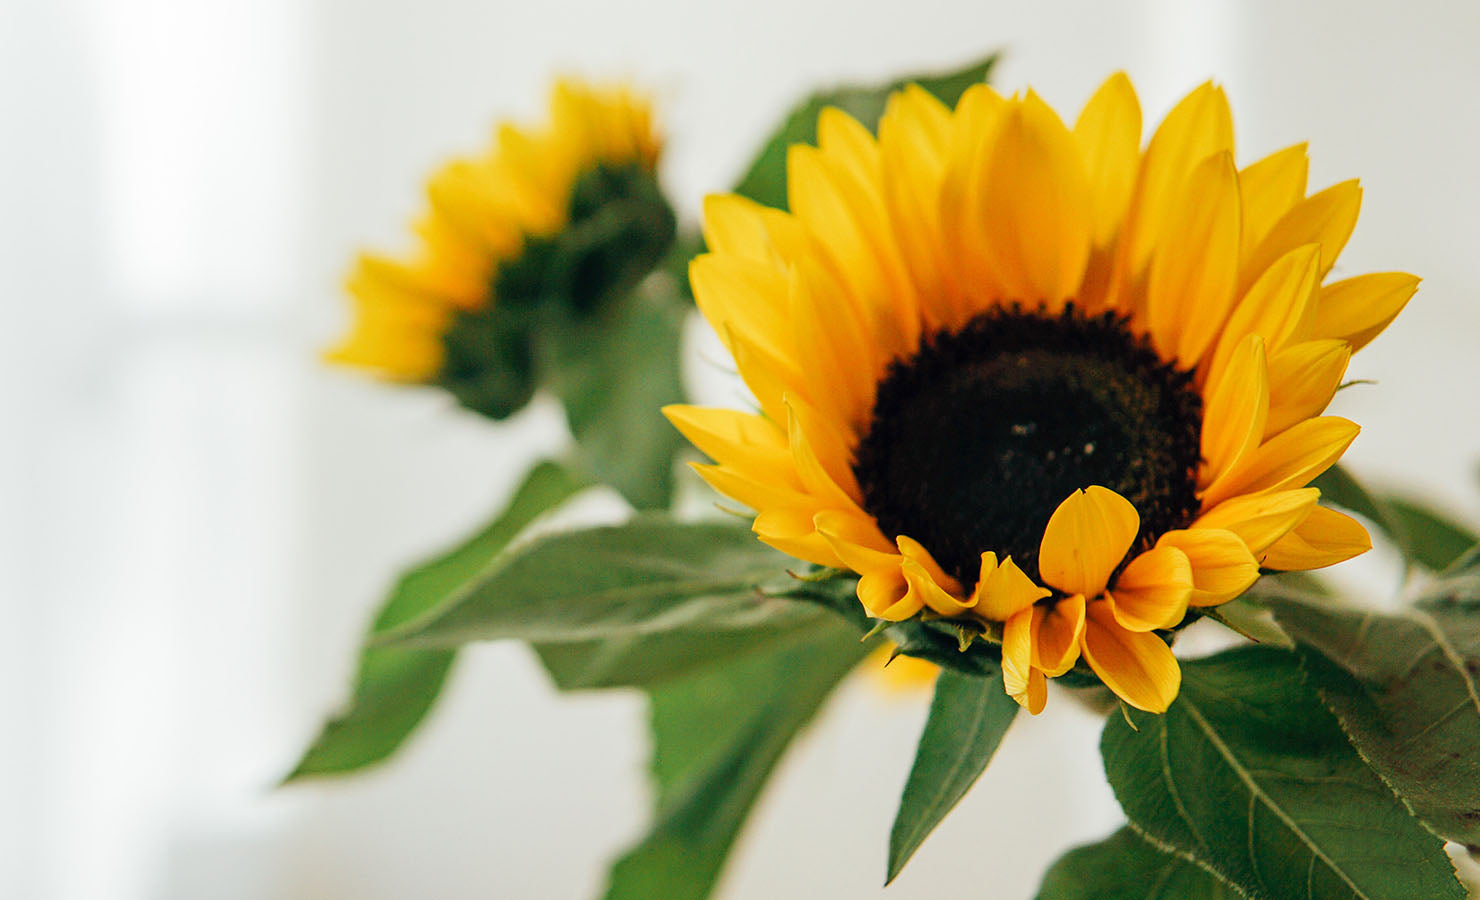 bloomthis-blog-for-him-flowers-gifts-for-every-occasion-05-sunflower-stalks